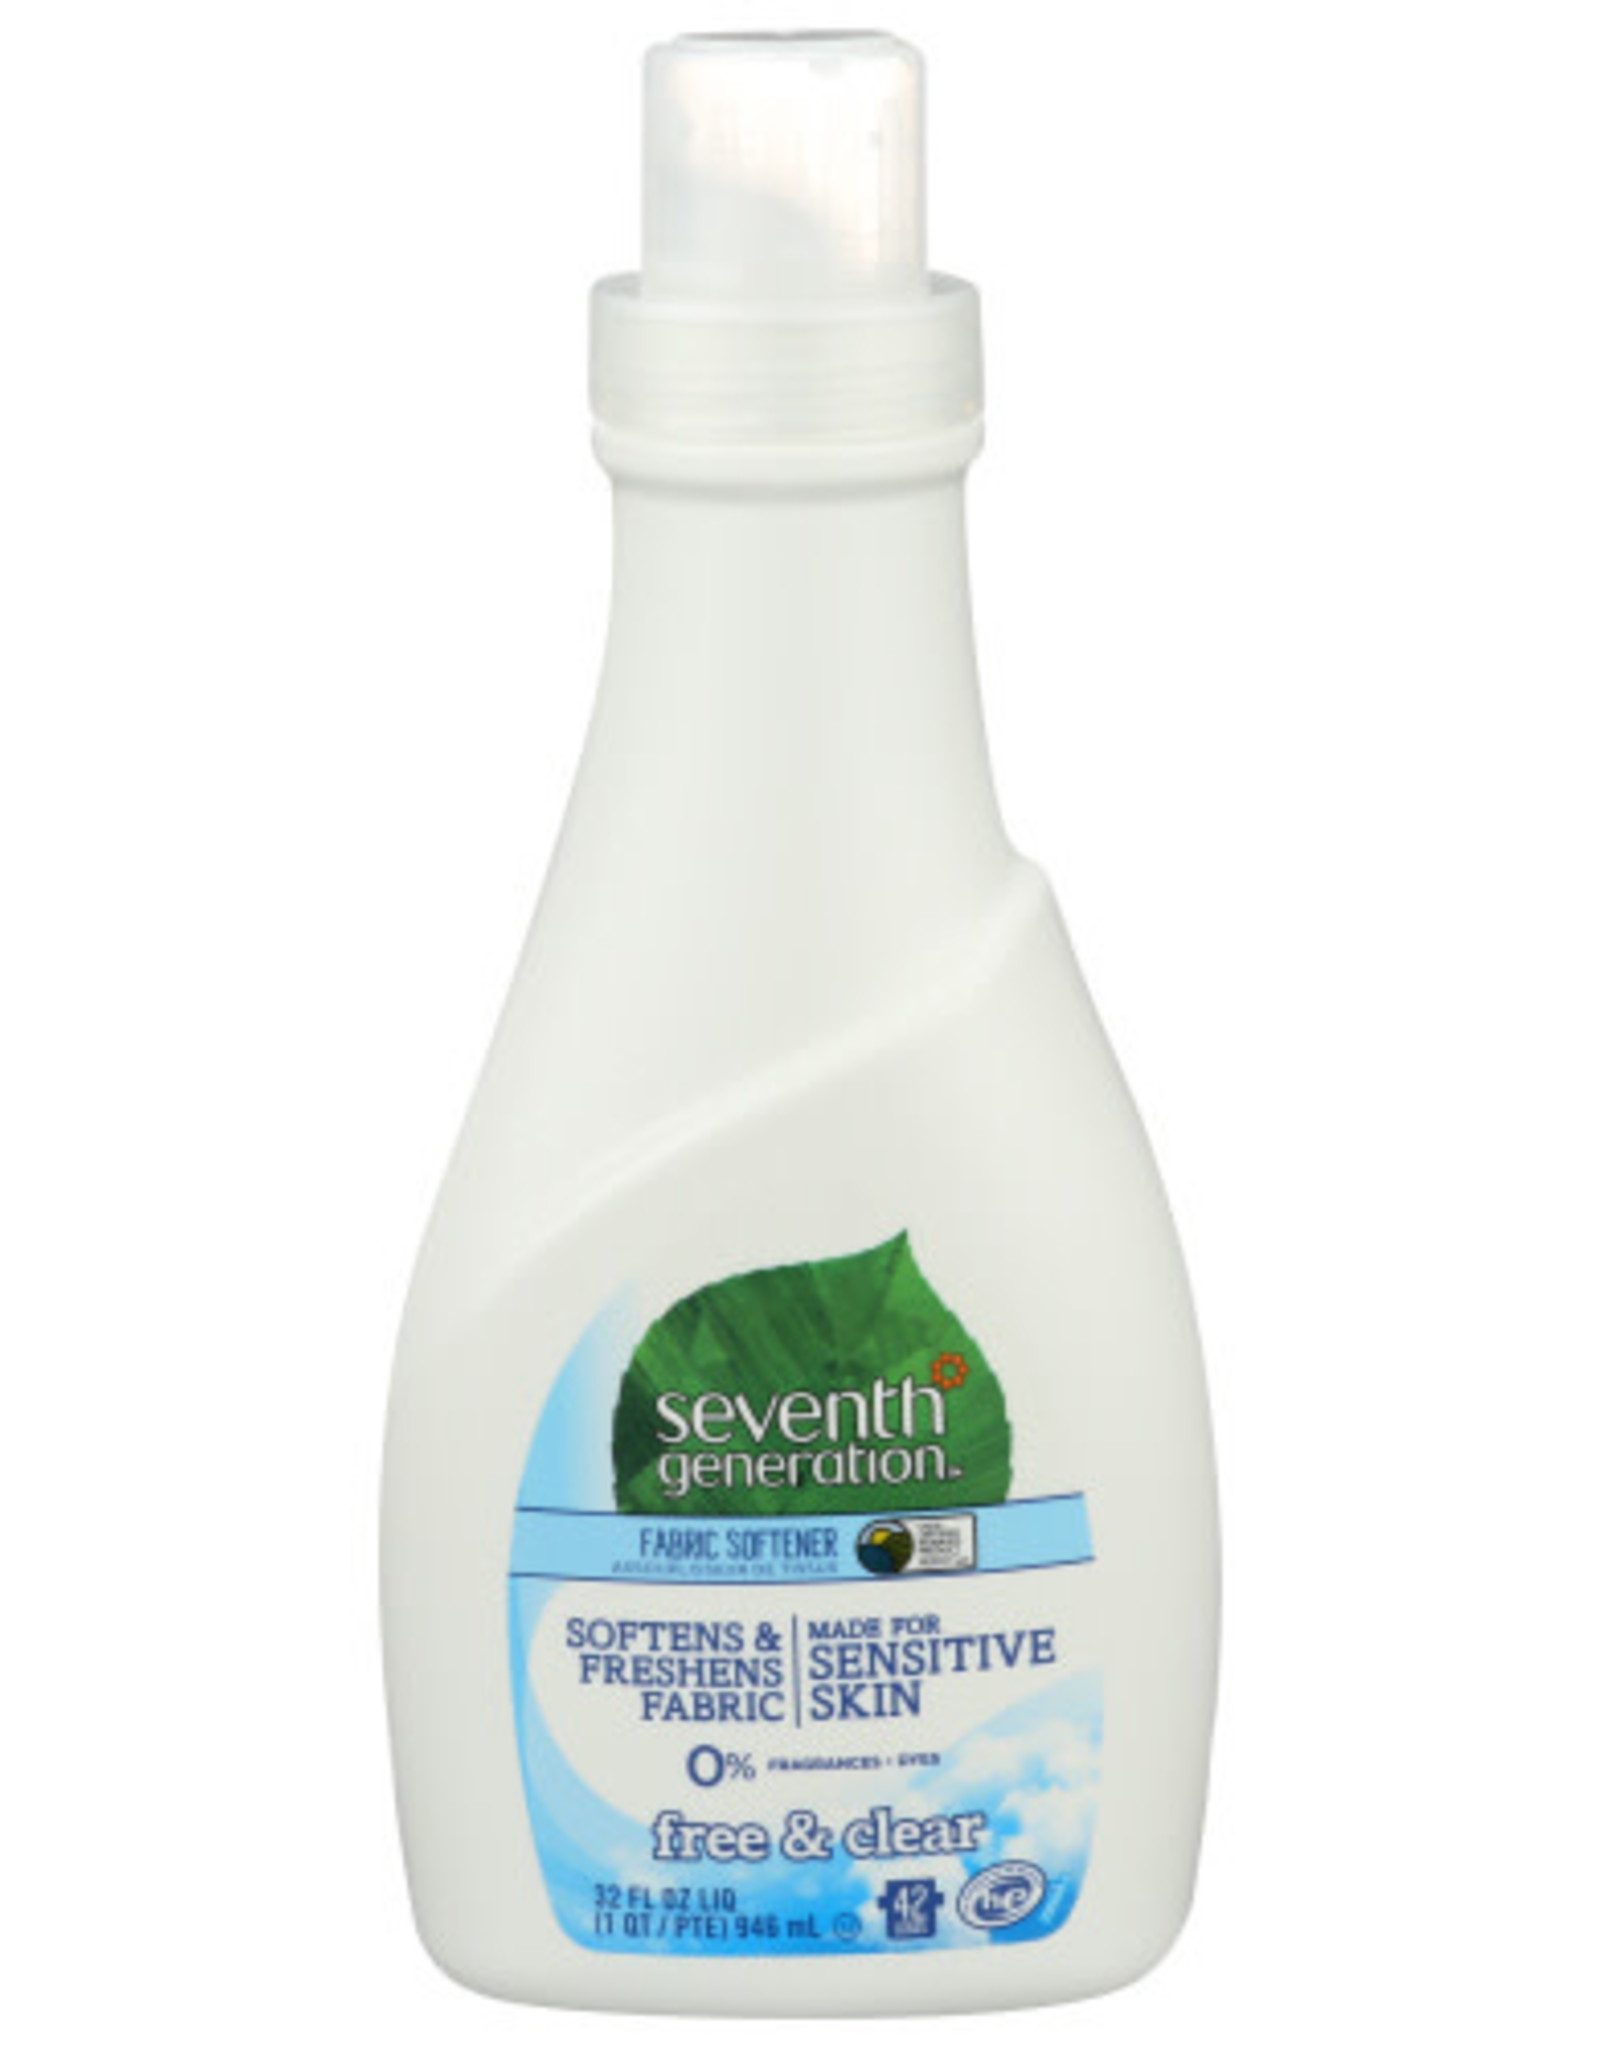 SEVENTH GENERATION SEVENTH GENERATION FABRIC SOFTENER, FREE AND CLEAR, 32 FL. OZ.